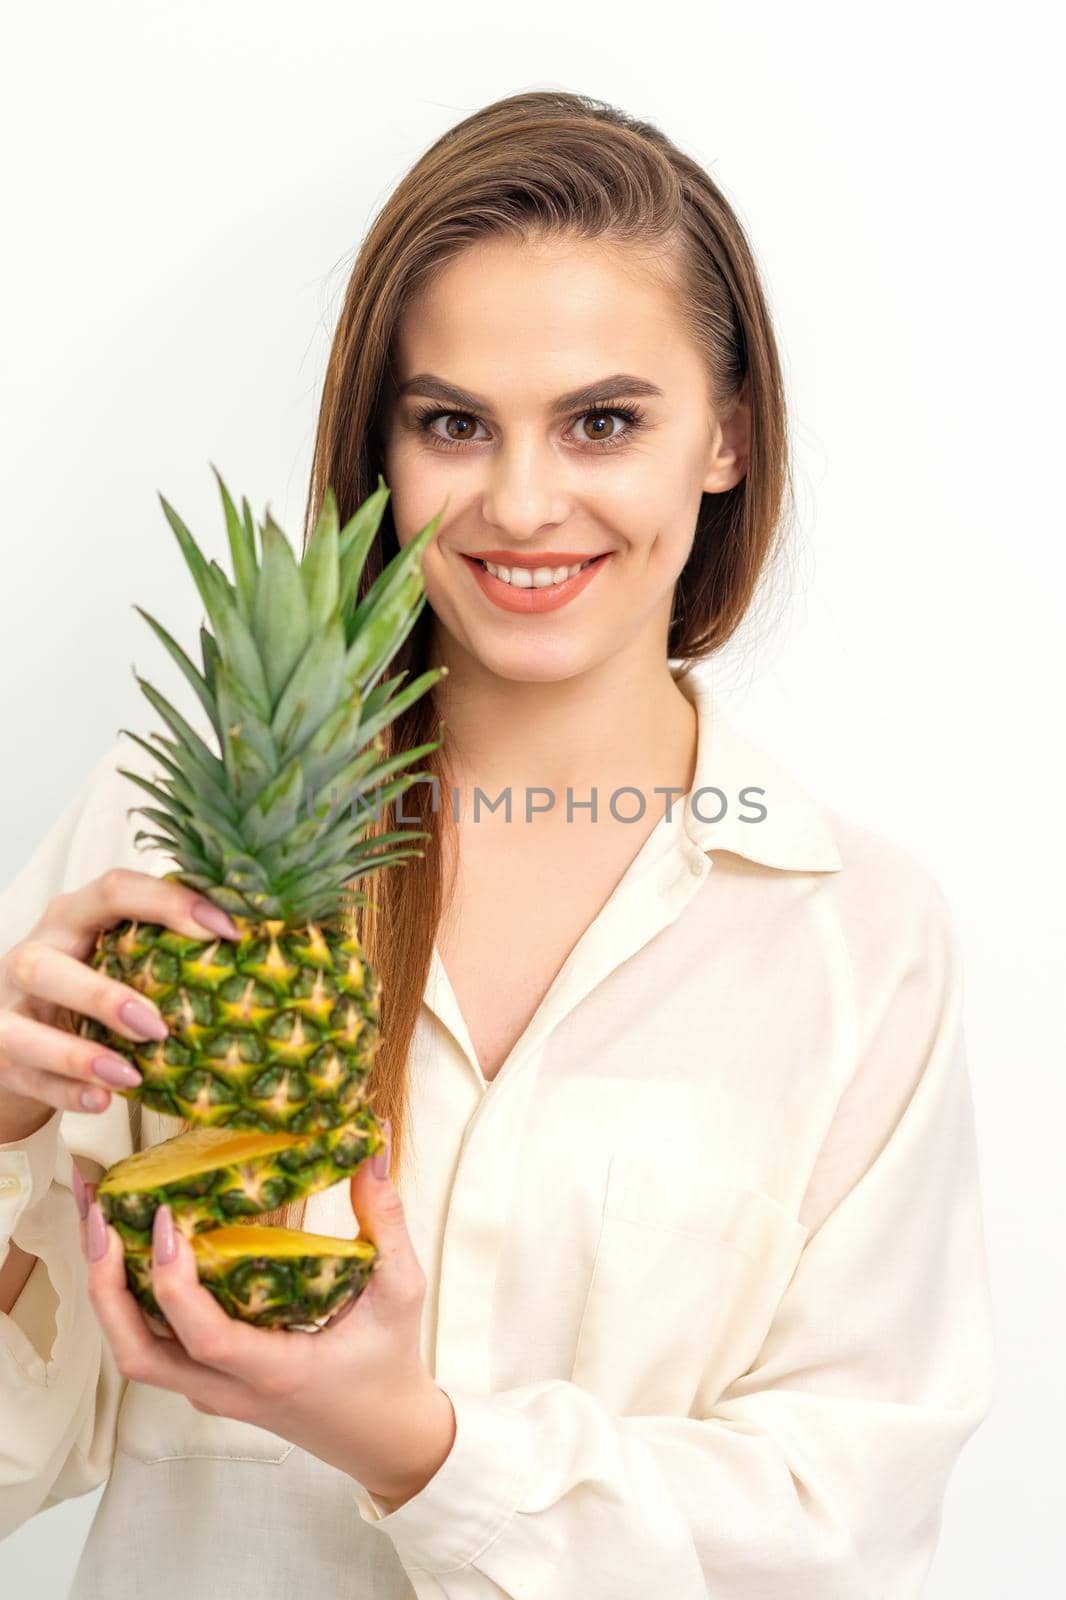 Beautiful young Caucasian woman holding pineapple and smiling, wearing a white shirt over white background. by okskukuruza